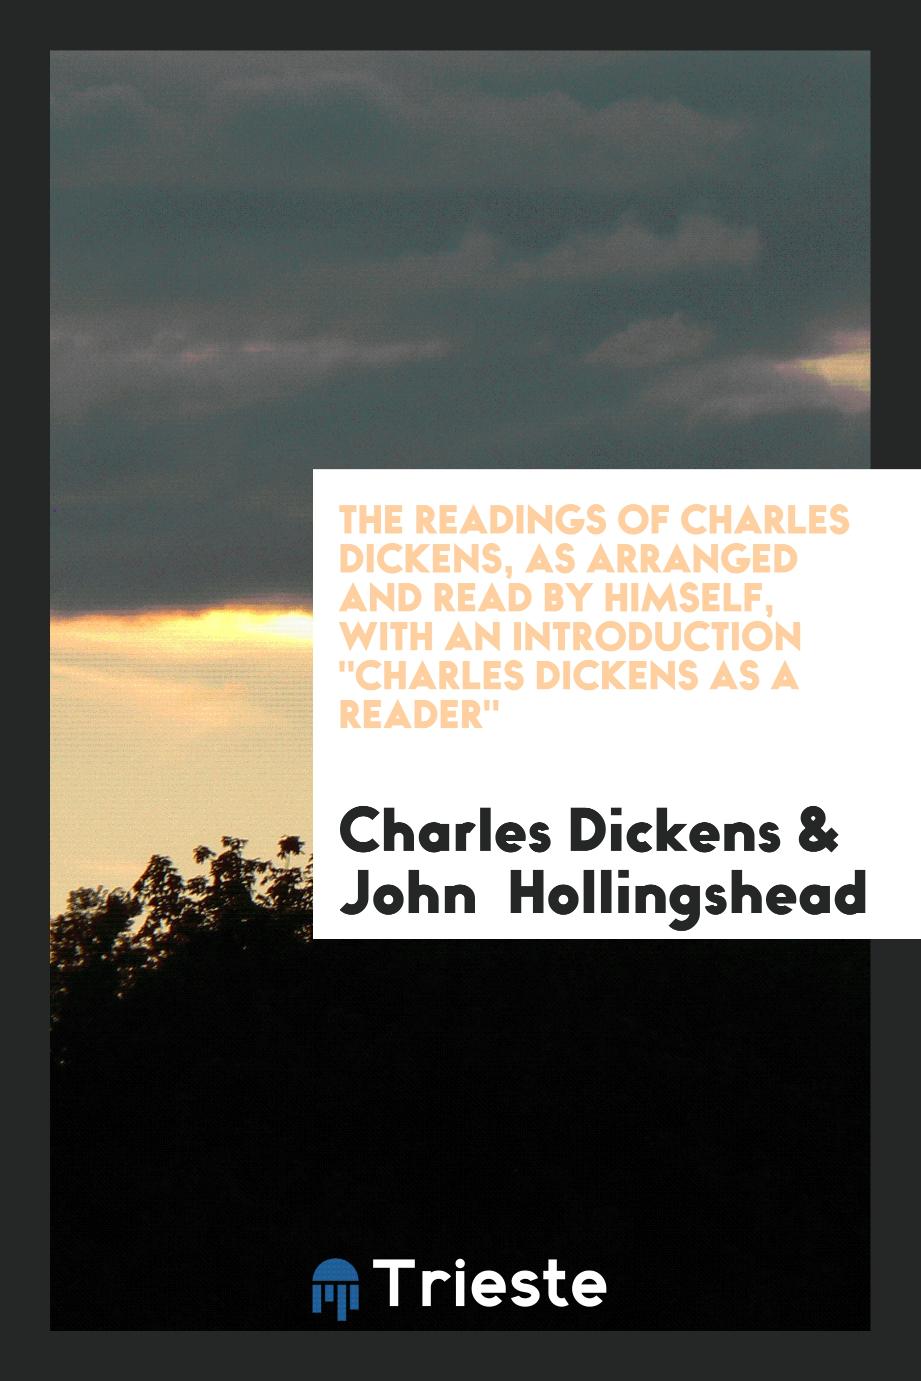 The Readings of Charles Dickens, as Arranged and Read by Himself, with an Introduction "Charles Dickens as a Reader"